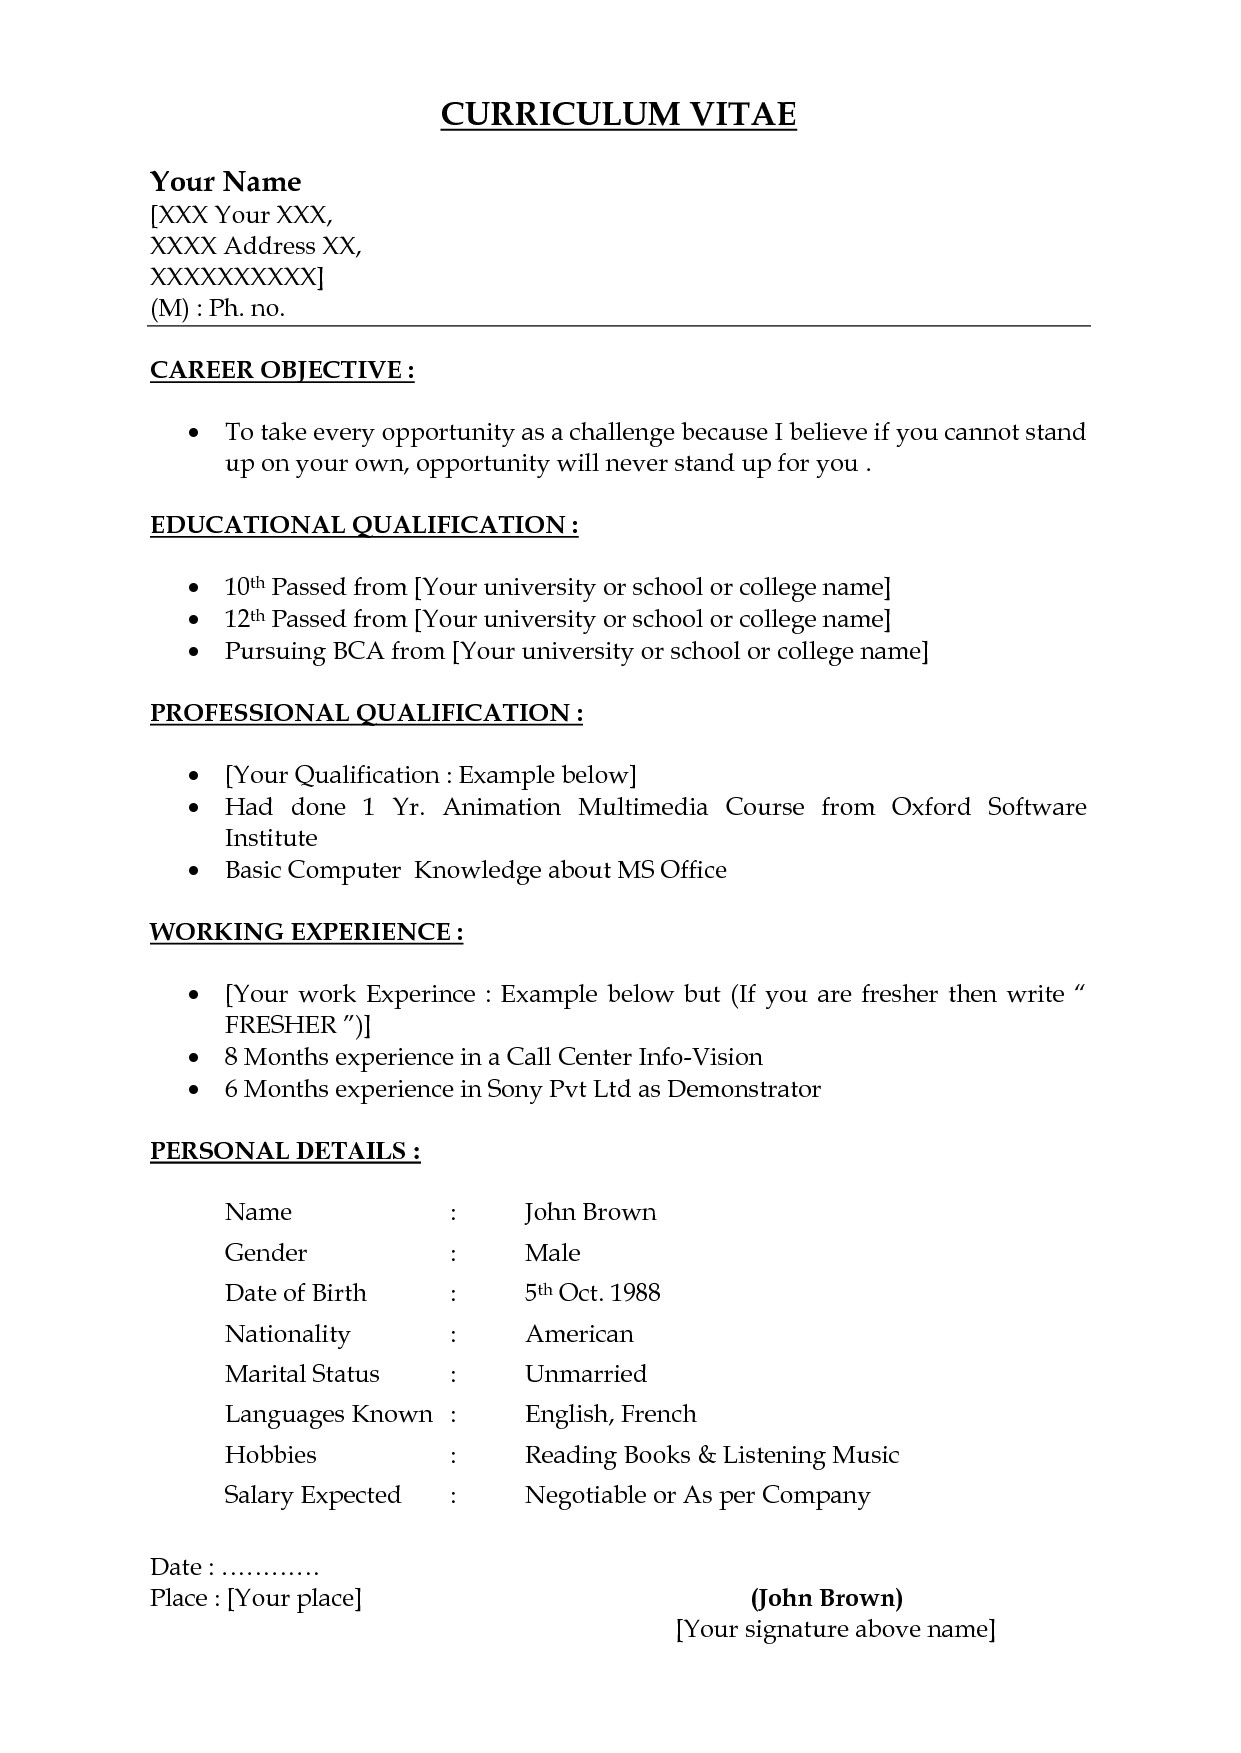 how to keep resume one page resumes examples 25988